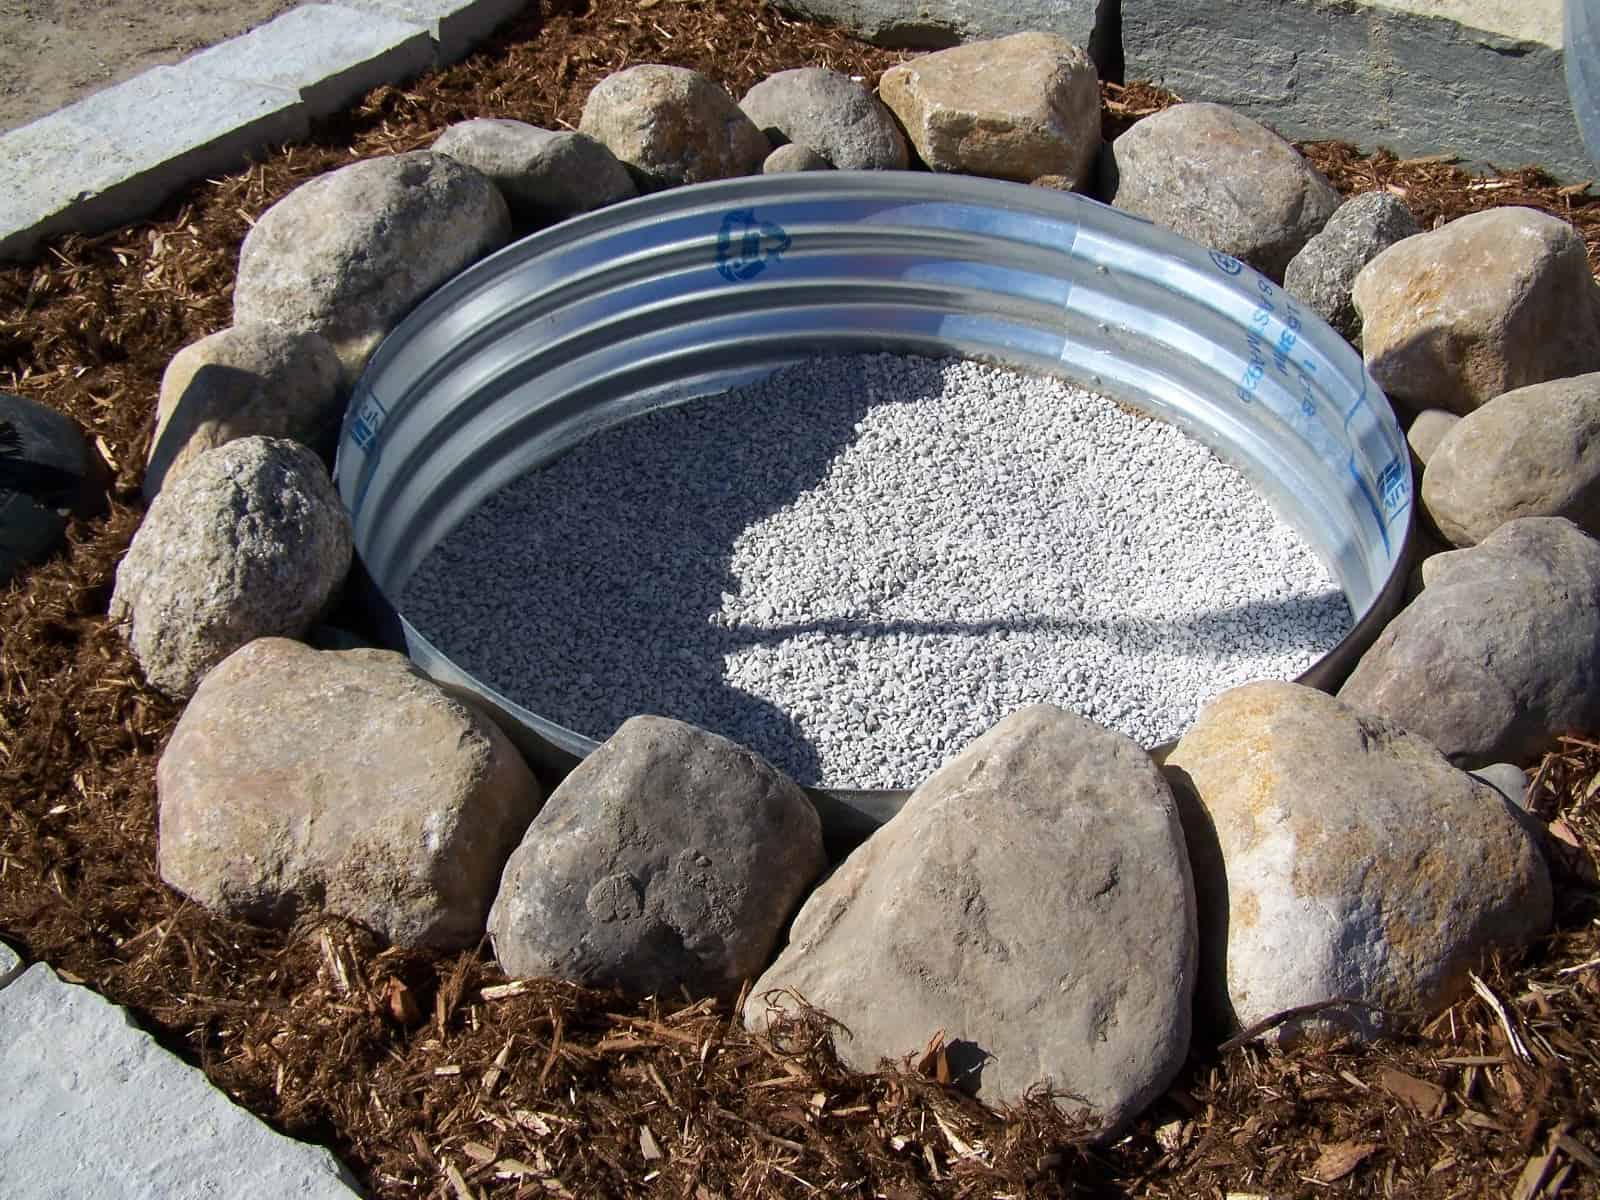 Tips for building your own safe fire pit